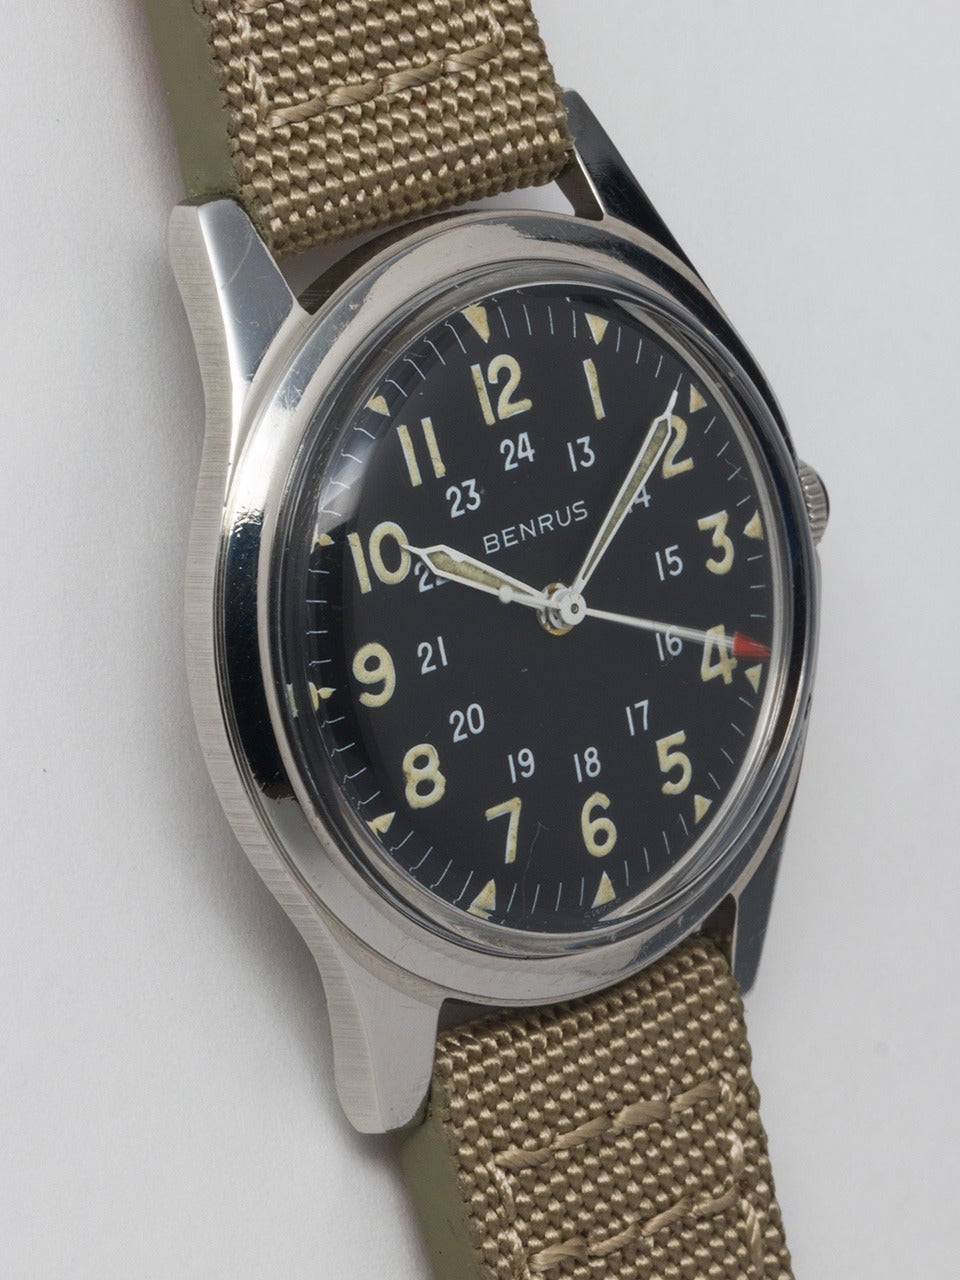 Benrus Steel Military Wristwatch, circa 1960s, 34mm case with smooth bezel, with original glossy black dial with luminous Arabic figures, inner 24-hour indications, and indexes and luminous hands. 17-jewel manual-wind movement with sweep seconds.